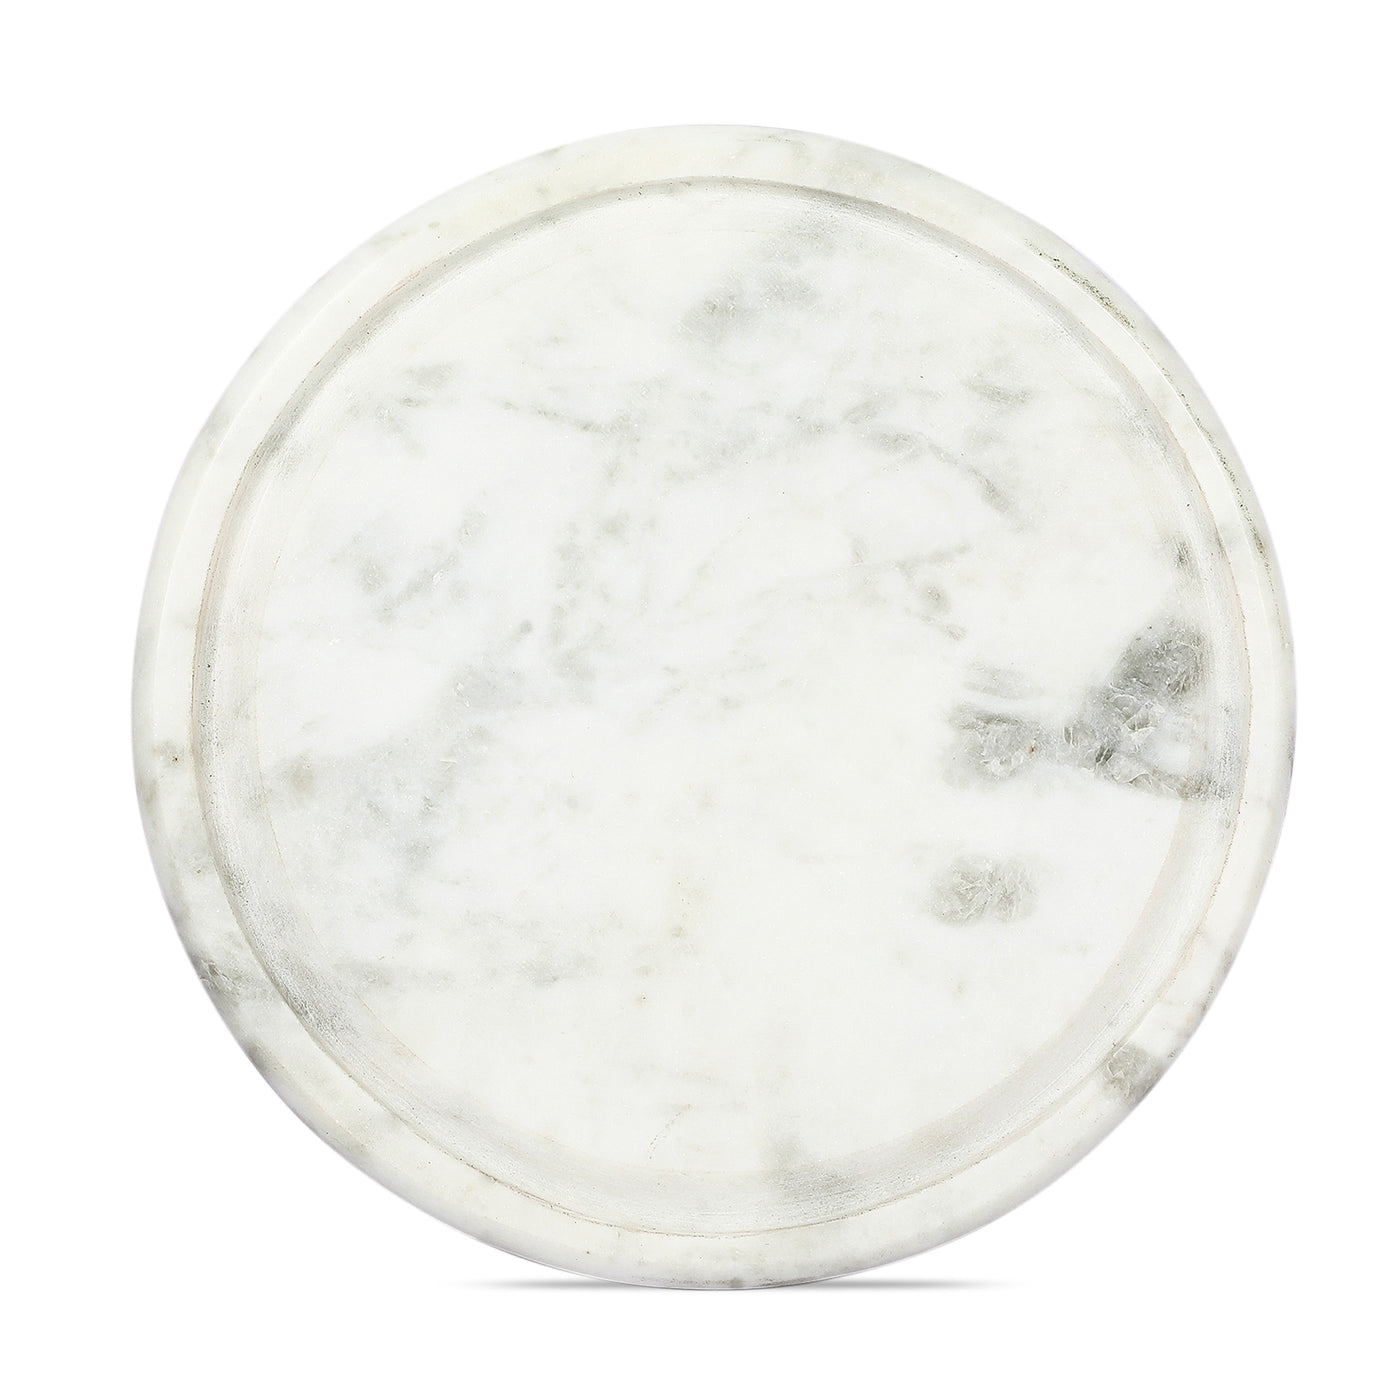 Marbluxe Circular Serving Board with Glass Cover